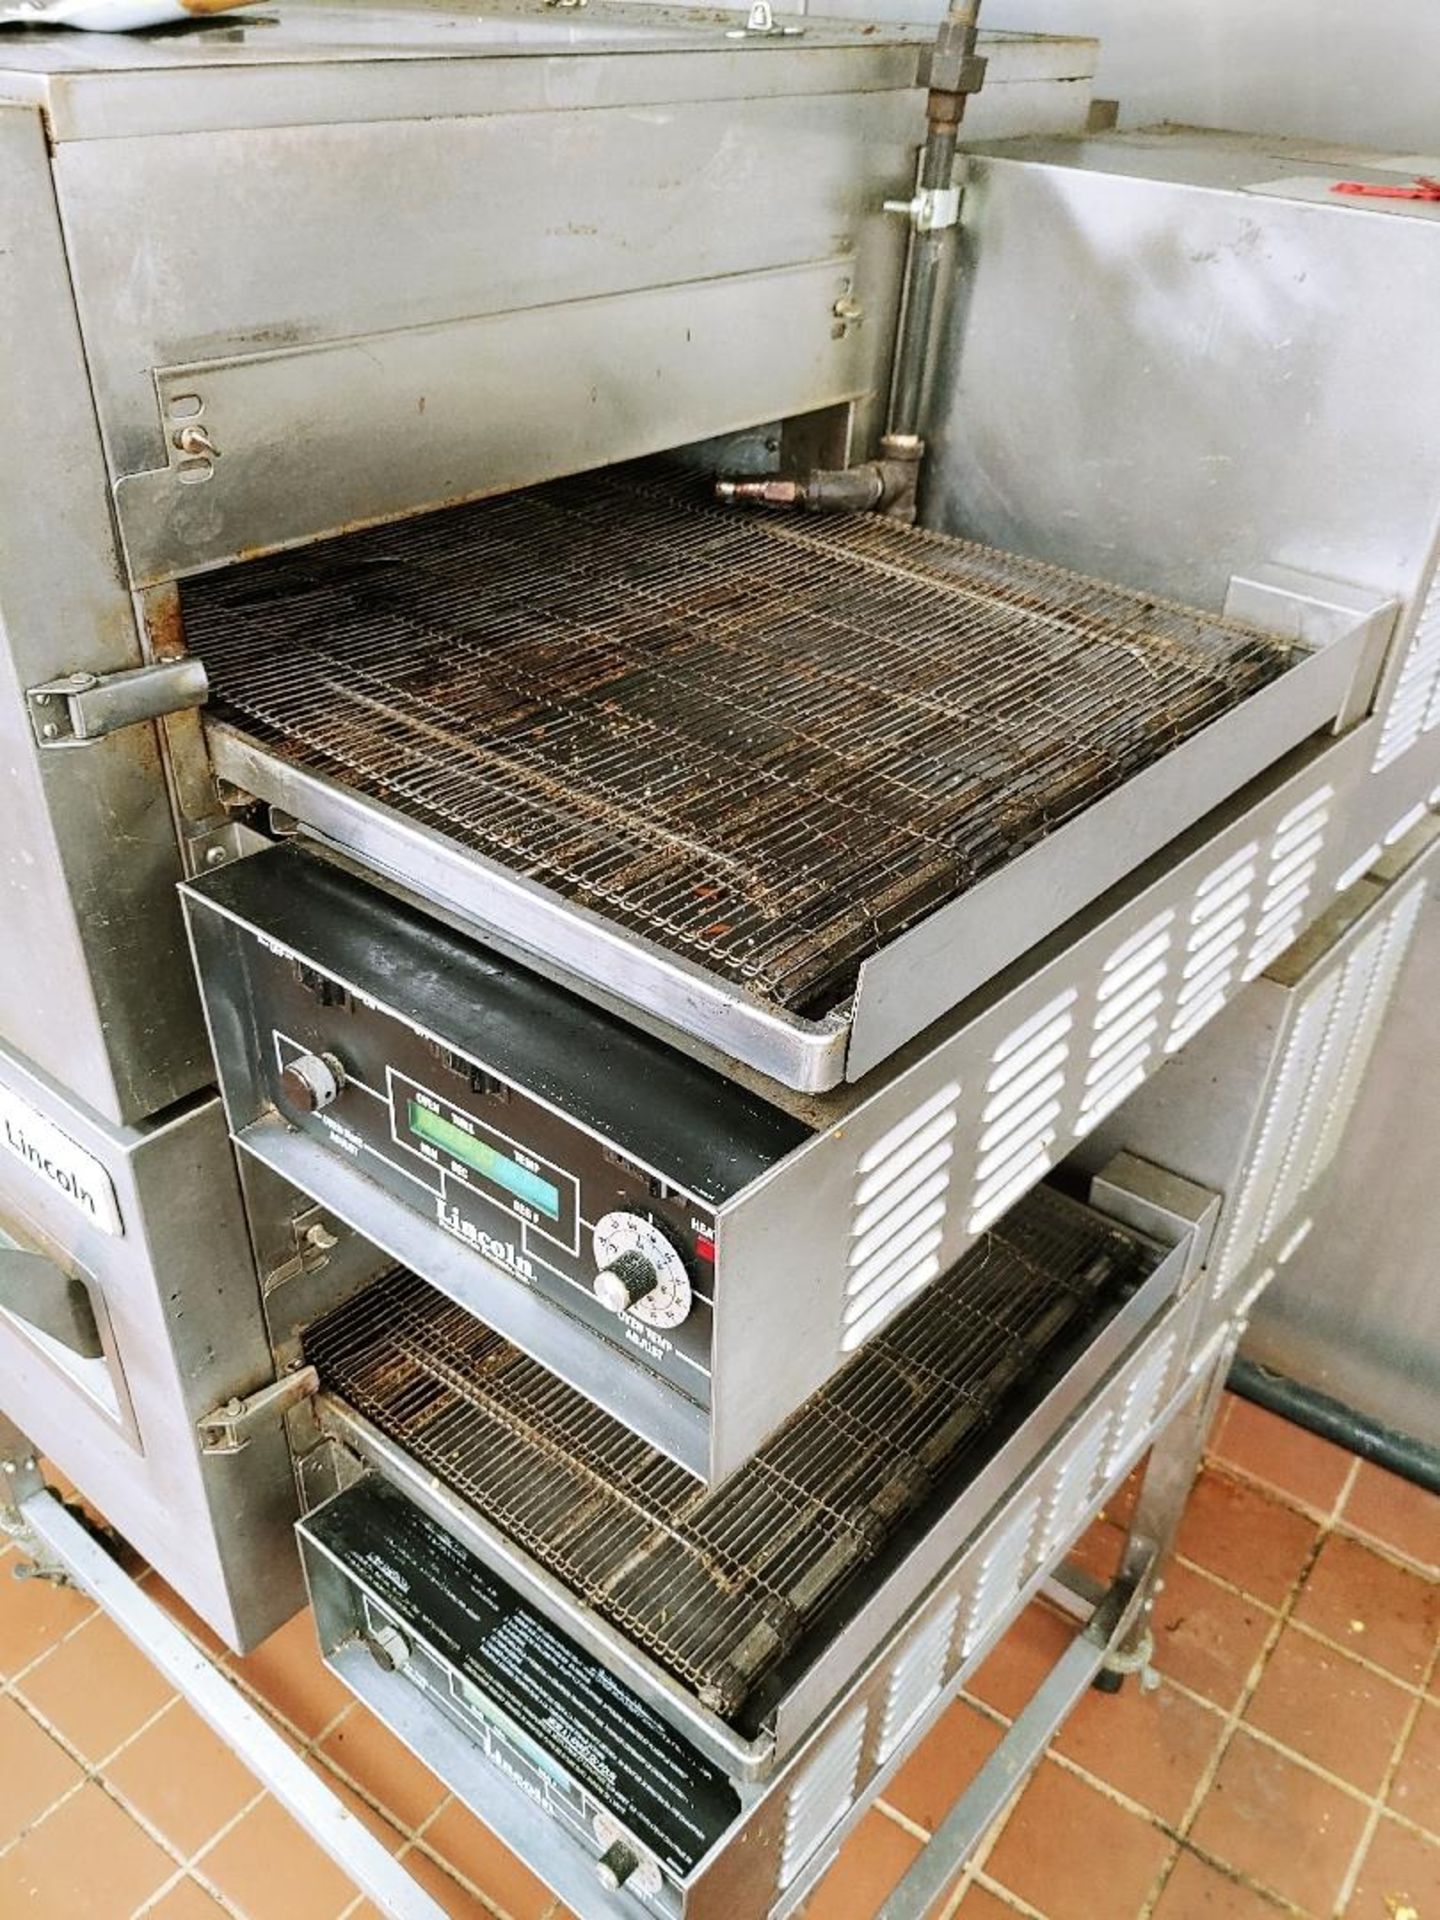 LINCOLN FOODSERVICE PRODUCTS INC. DUAL CONVEYOR PIZZA OVEN WITH DIGITAL CONTROL PANELS, MODEL 1162-0 - Image 3 of 5